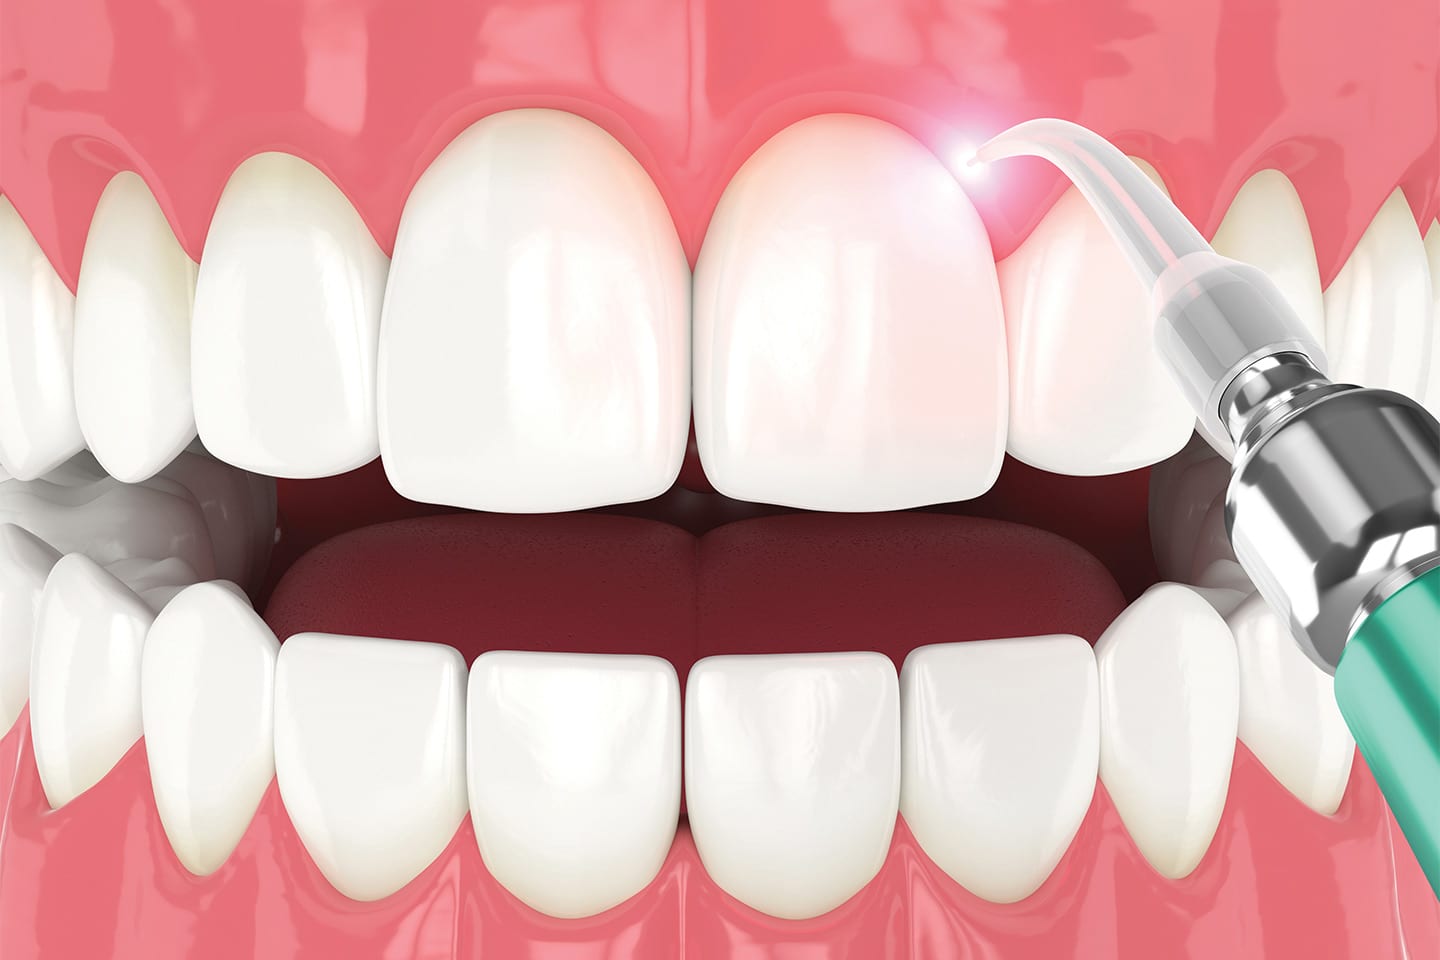 LANAP Laser Treatment being performed on gums